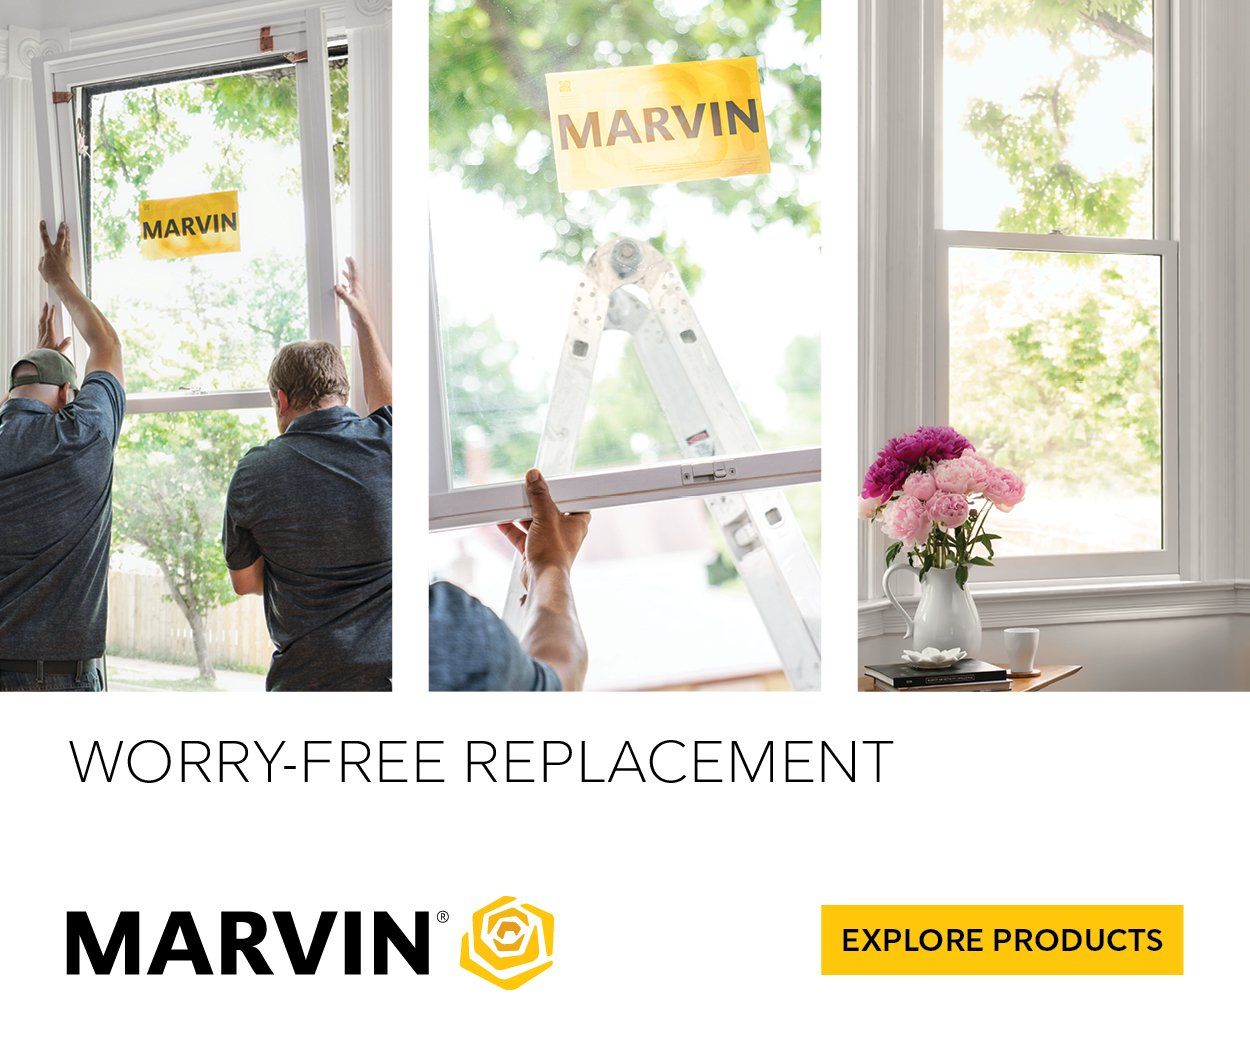 Marvin Worry-Free Replacement